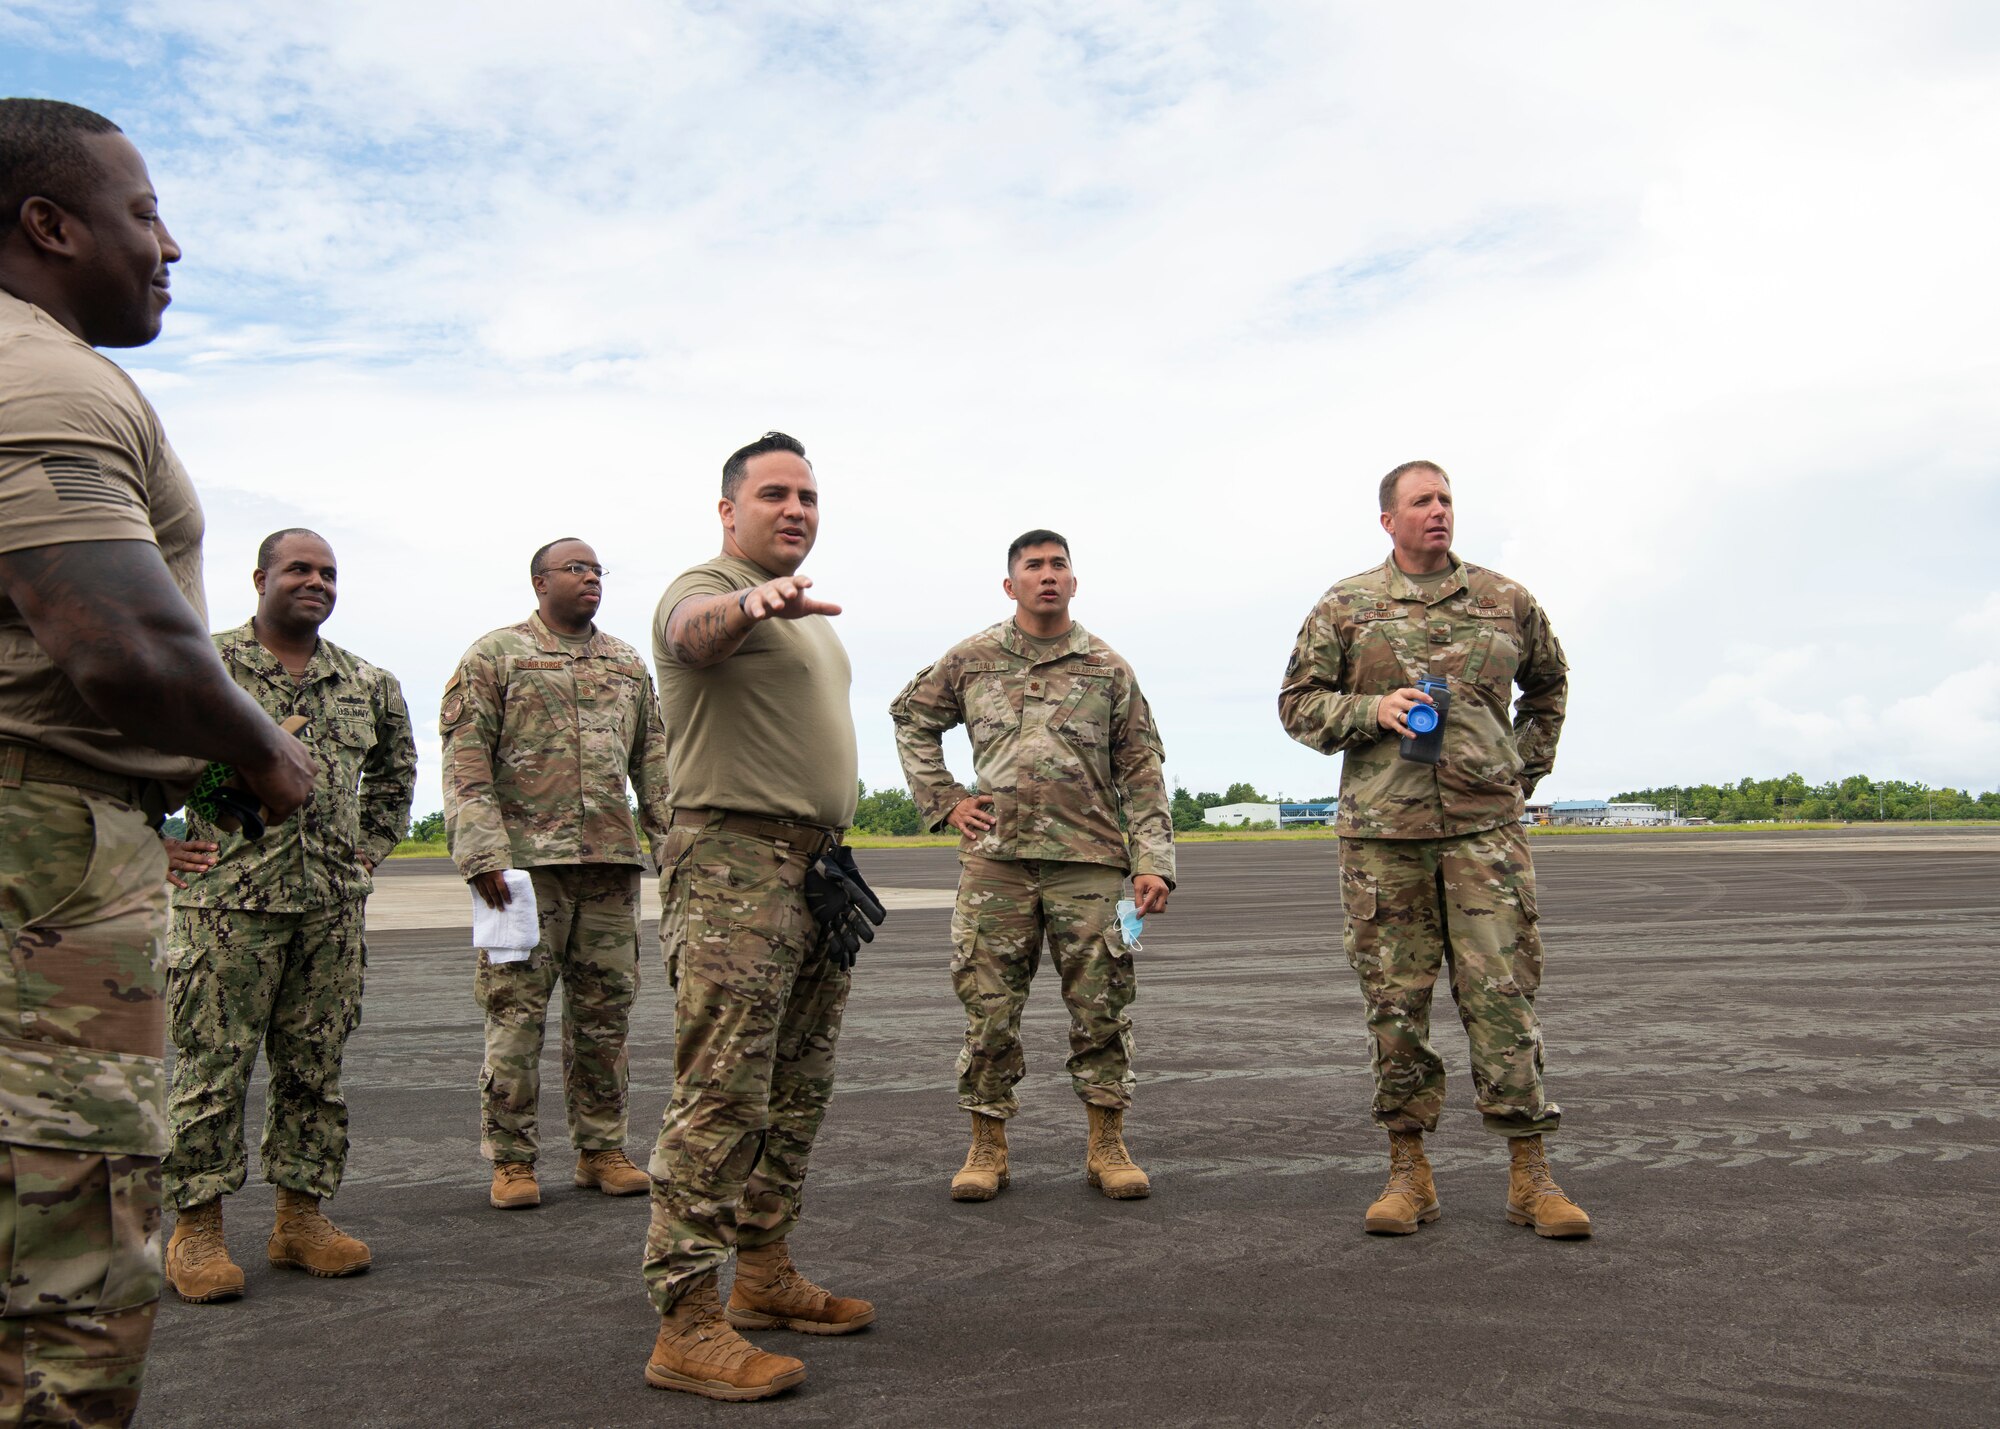 U.S. Air Force Master Sgt. Lynn Stephan, an air advisor from the 36th Contingency Response Support Squadron, briefs U.S. Air Force Col. R Schmidt, 36th Contingency Response Group commander, on the Palau National Airport, June 23, 2021. A Mobile Training Team of subject matter experts from Andersen AFB went to teach members from the Ministry of Justice and Ministry of Public Infrastructure and Institution in Palau how to properly utilize equipment they received from the Department of Defense. (U.S. Air Force photo by Senior Airman Aubree Owens)